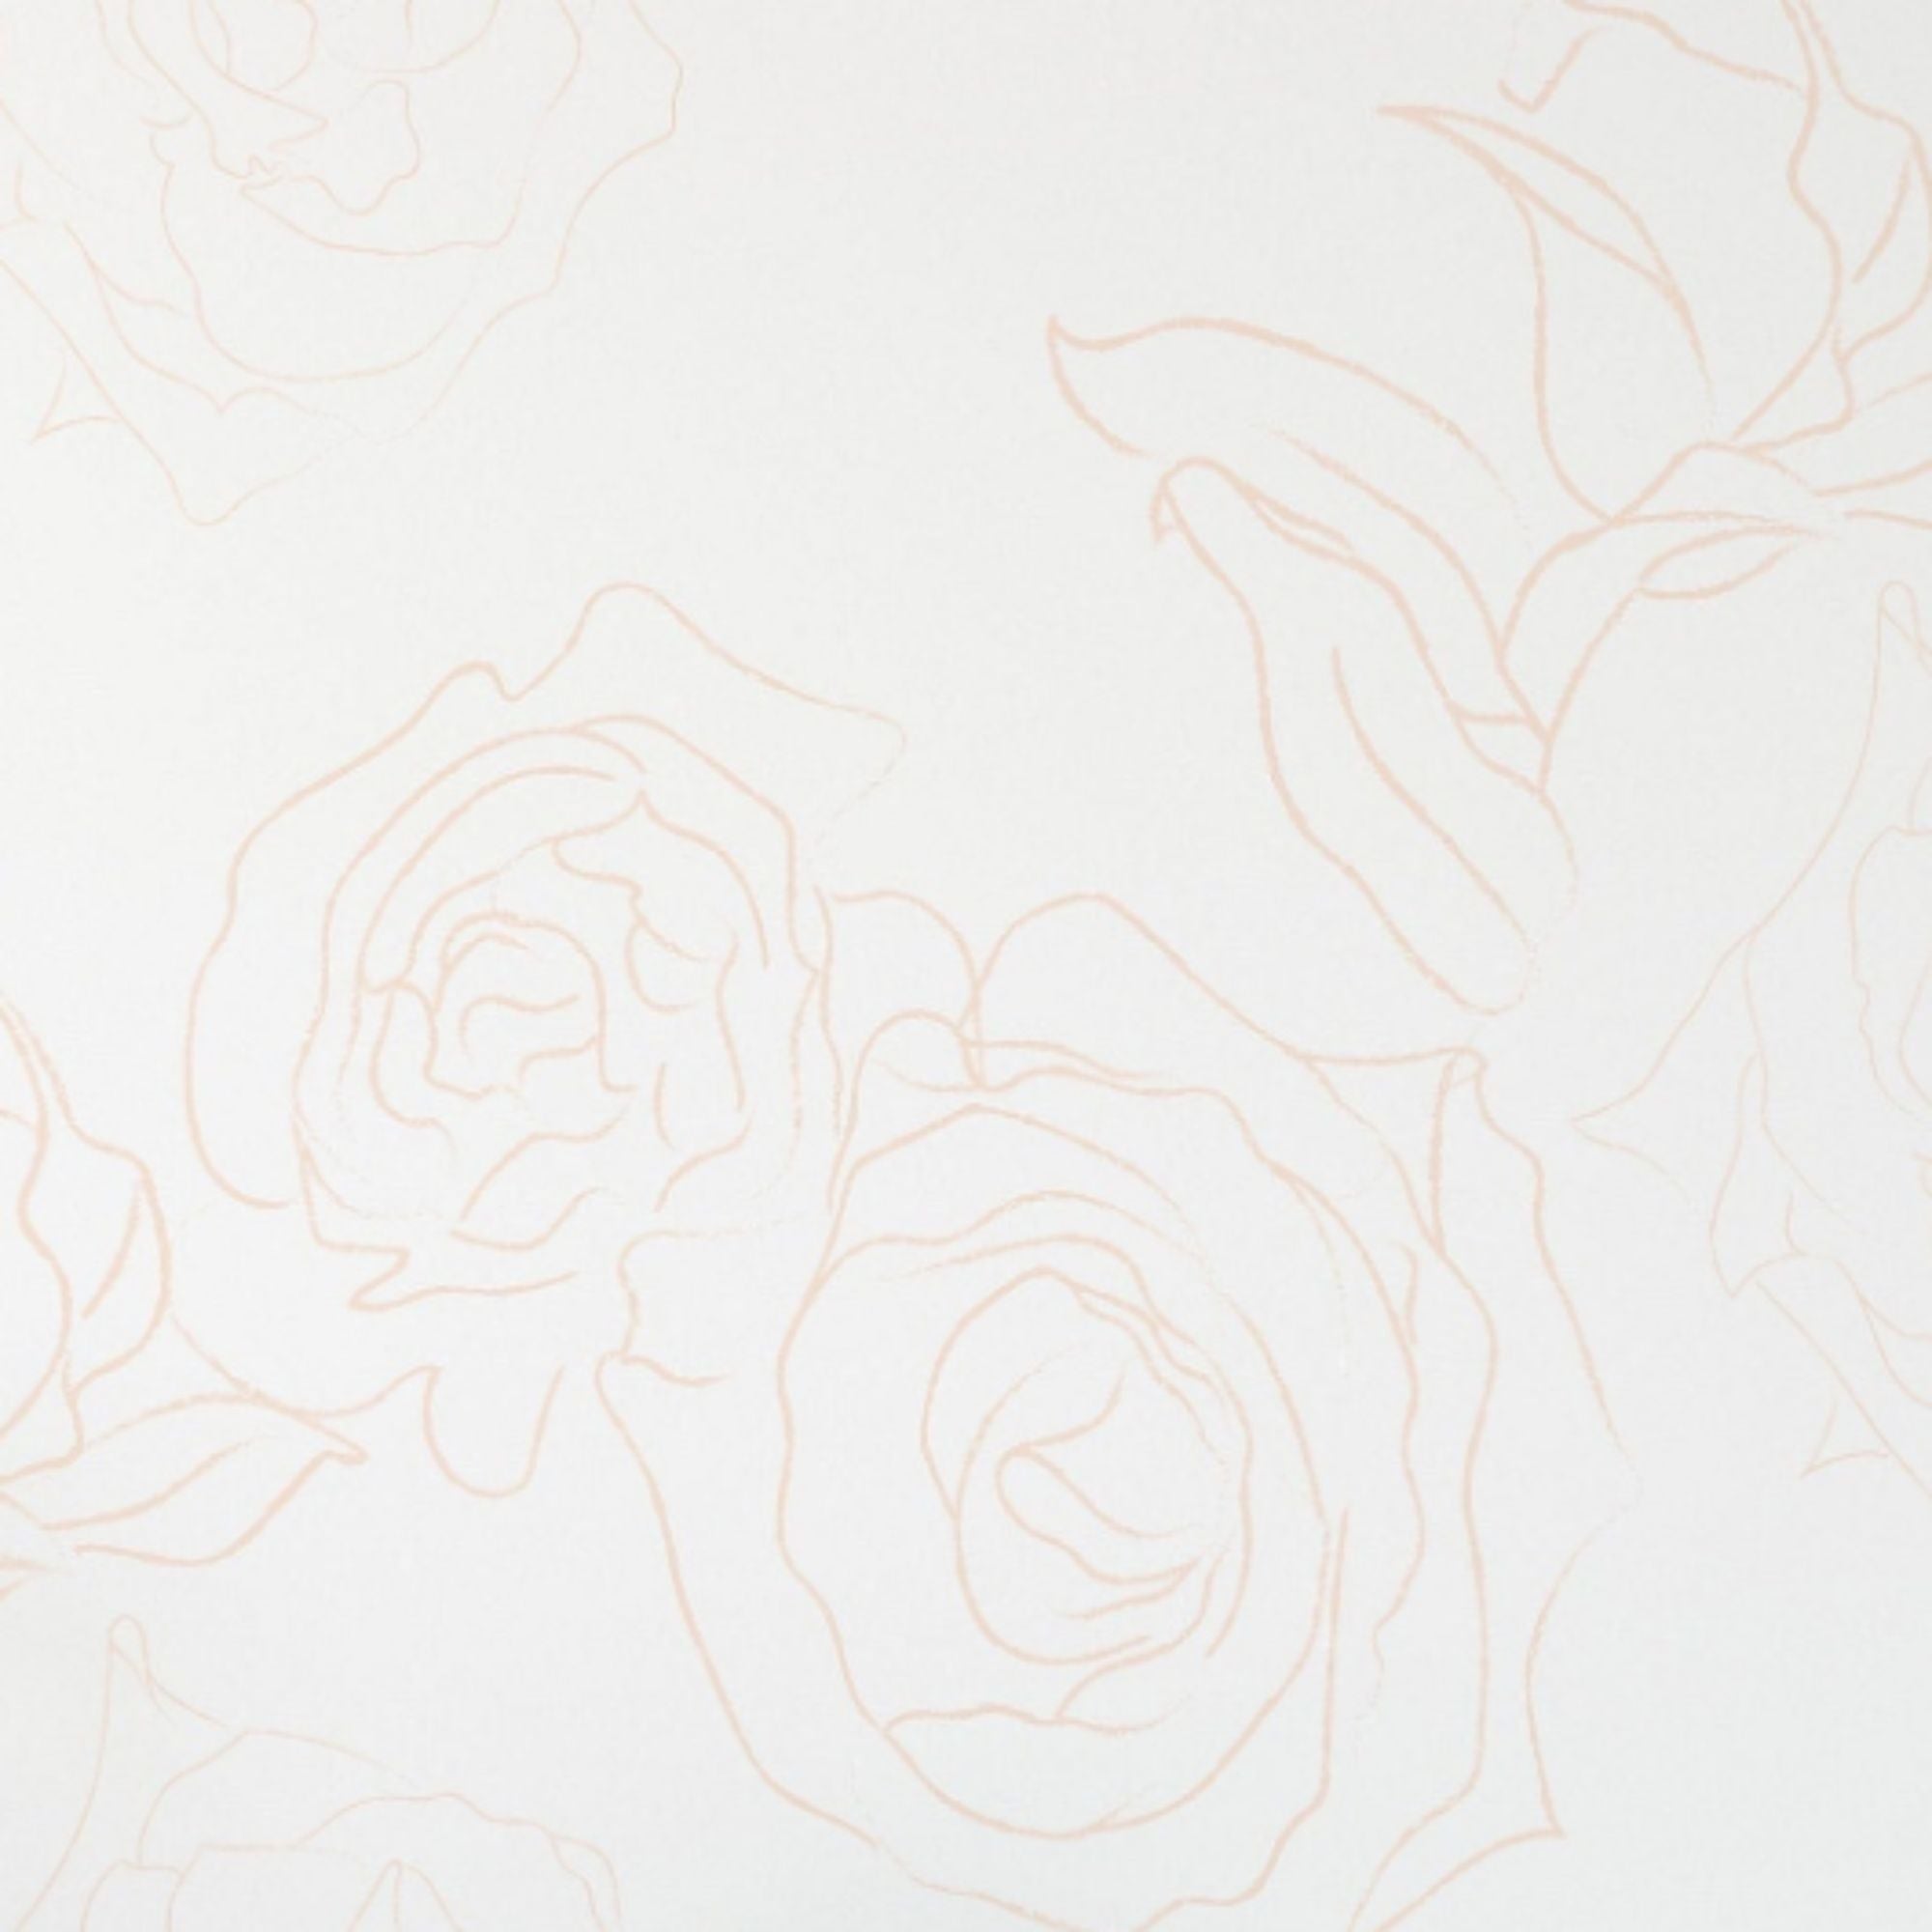 Close-up of the Minimal Floral Line Wallpaper highlighting the intricate line art of roses, drawn in a minimalist style with copper lines, offering a subtle yet elegant botanical motif that evokes a sense of calm and simplicity.